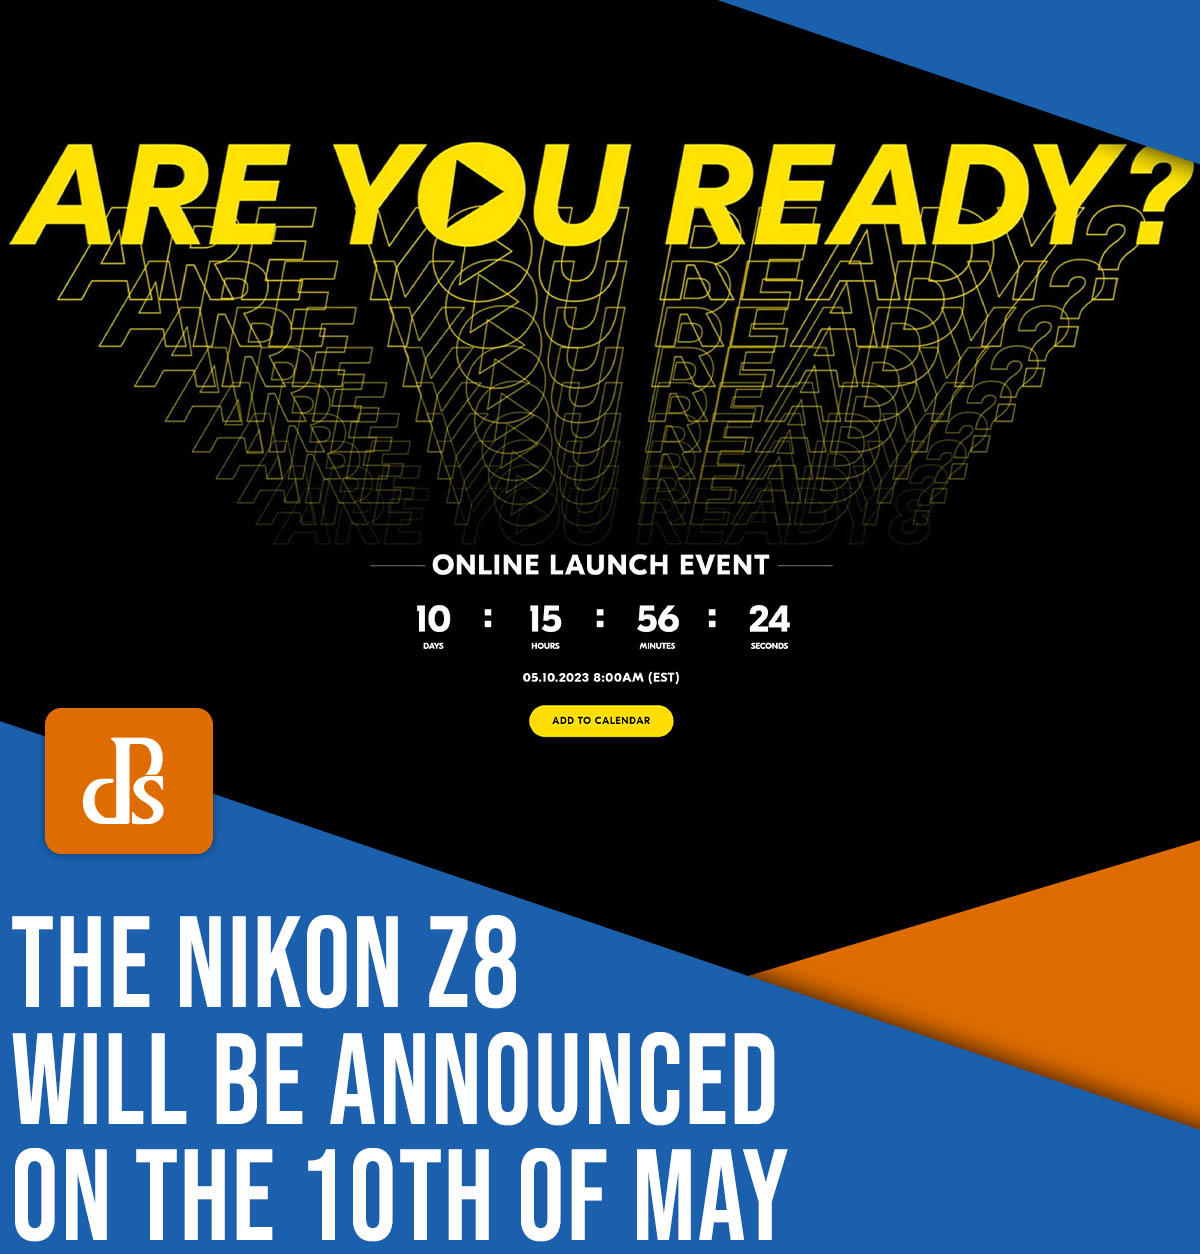 The Nikon Z8 will be announced on the 10th of May